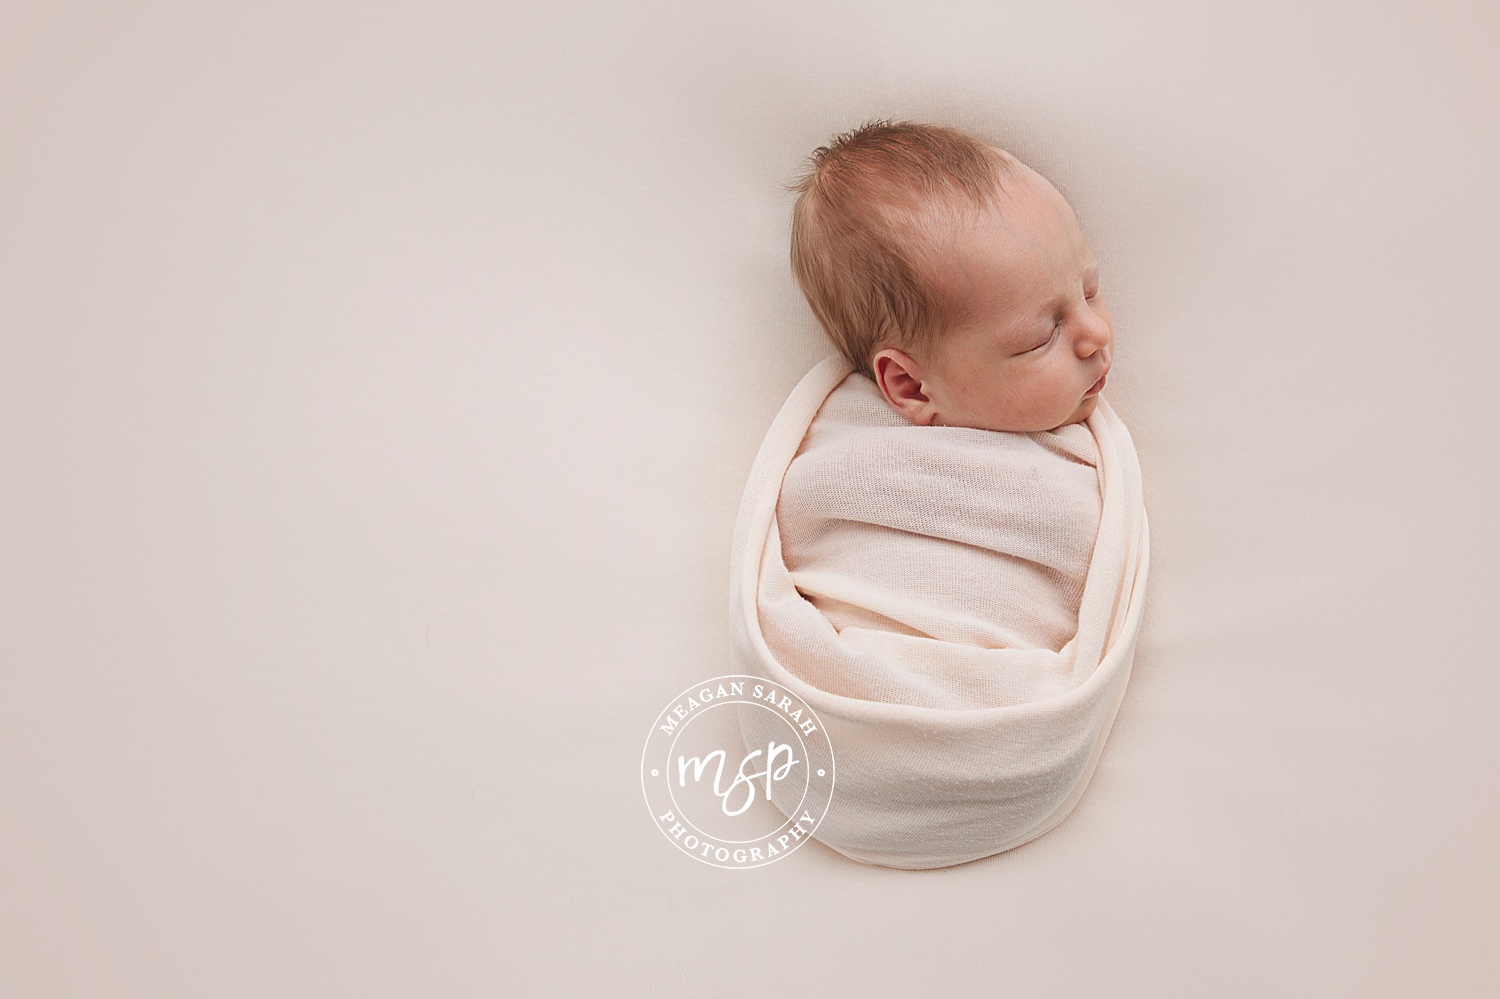 PHOTOGRAPHER,Katie Louise Williams,Horsforth Leeds Photographer,Horsforth Photographer,Leeds Photographer,Meagan Sarah Photography,Professional Photographer in Leeds,West Yorkshire Photographer,Turtle on Back,Swaddle,Peach,Birds Eye View on Back,Horsforth Newborn Photography,Leeds Baby Photographer,Leeds Newborn Photographer,Newborn Babies,Newborn Photographer,Newborn Photography,Photos of Babies,Photos of Newborns,Yorkshire Newborn Photographer,Yorkshire Newborn Photography,Sex of Baby,Girl,